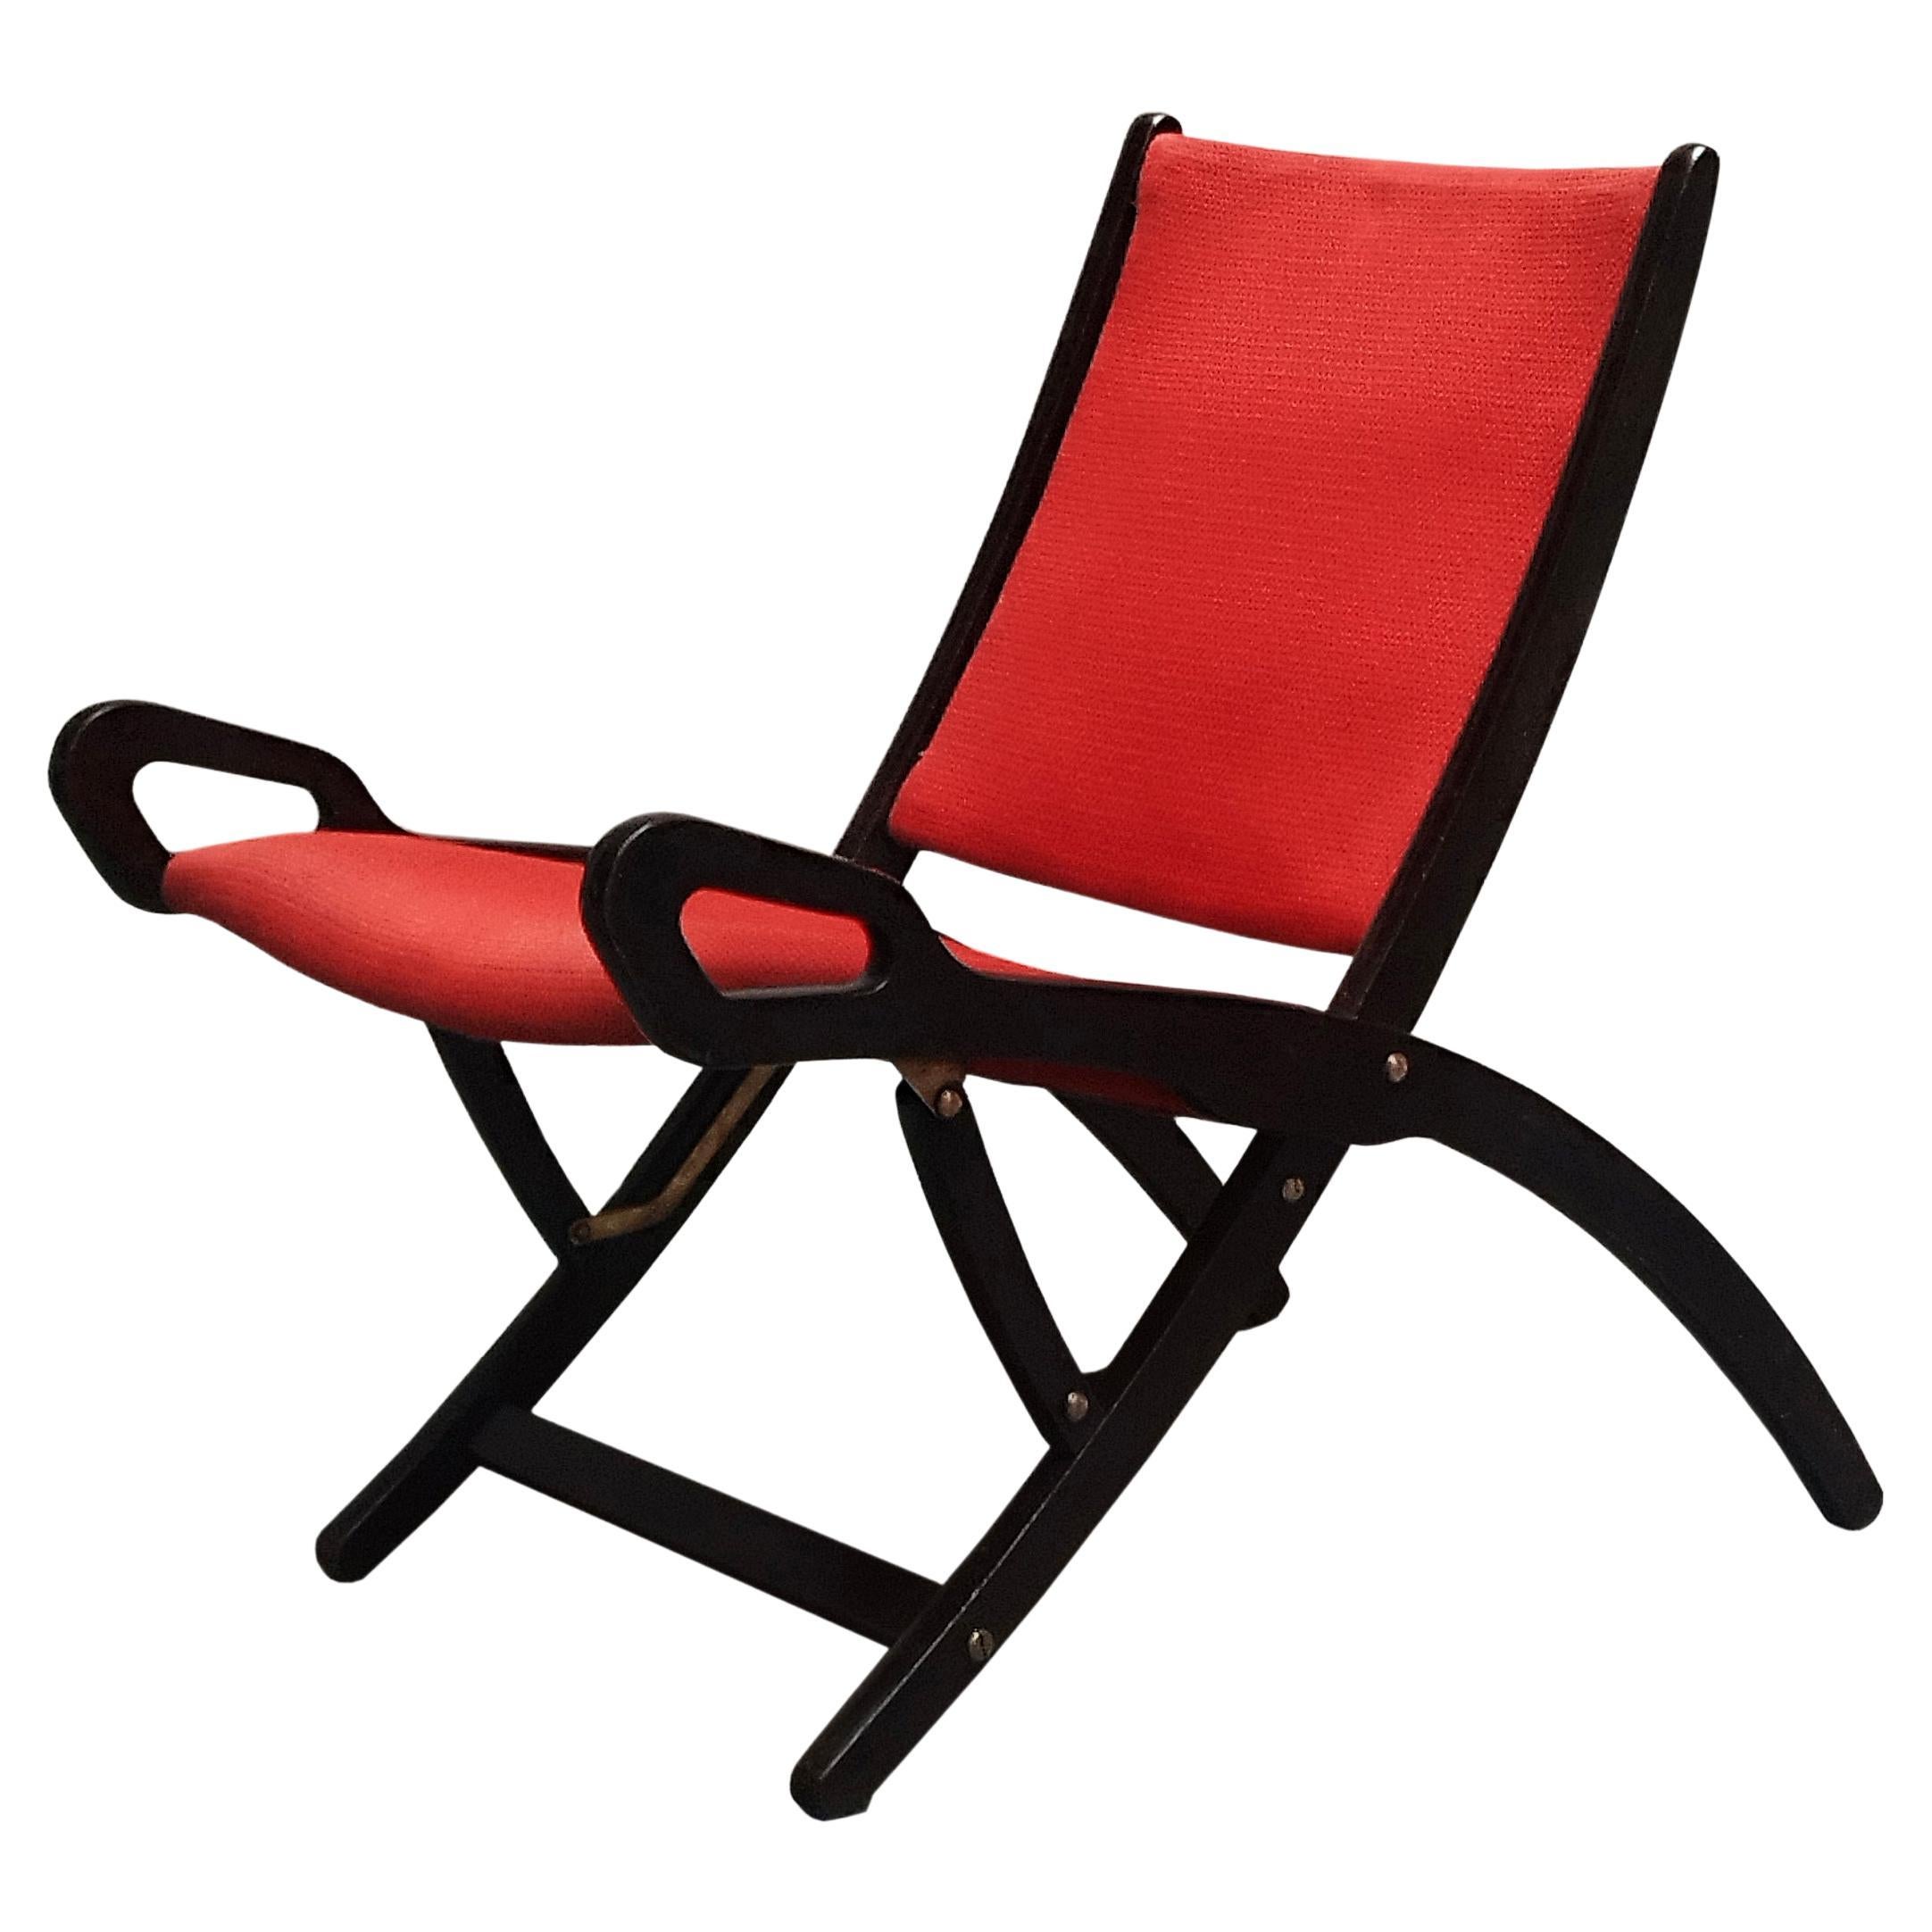 Gio Ponti for Fratelli Reguitti "Ninfea" Folding Chair, Italy, 1960s For Sale